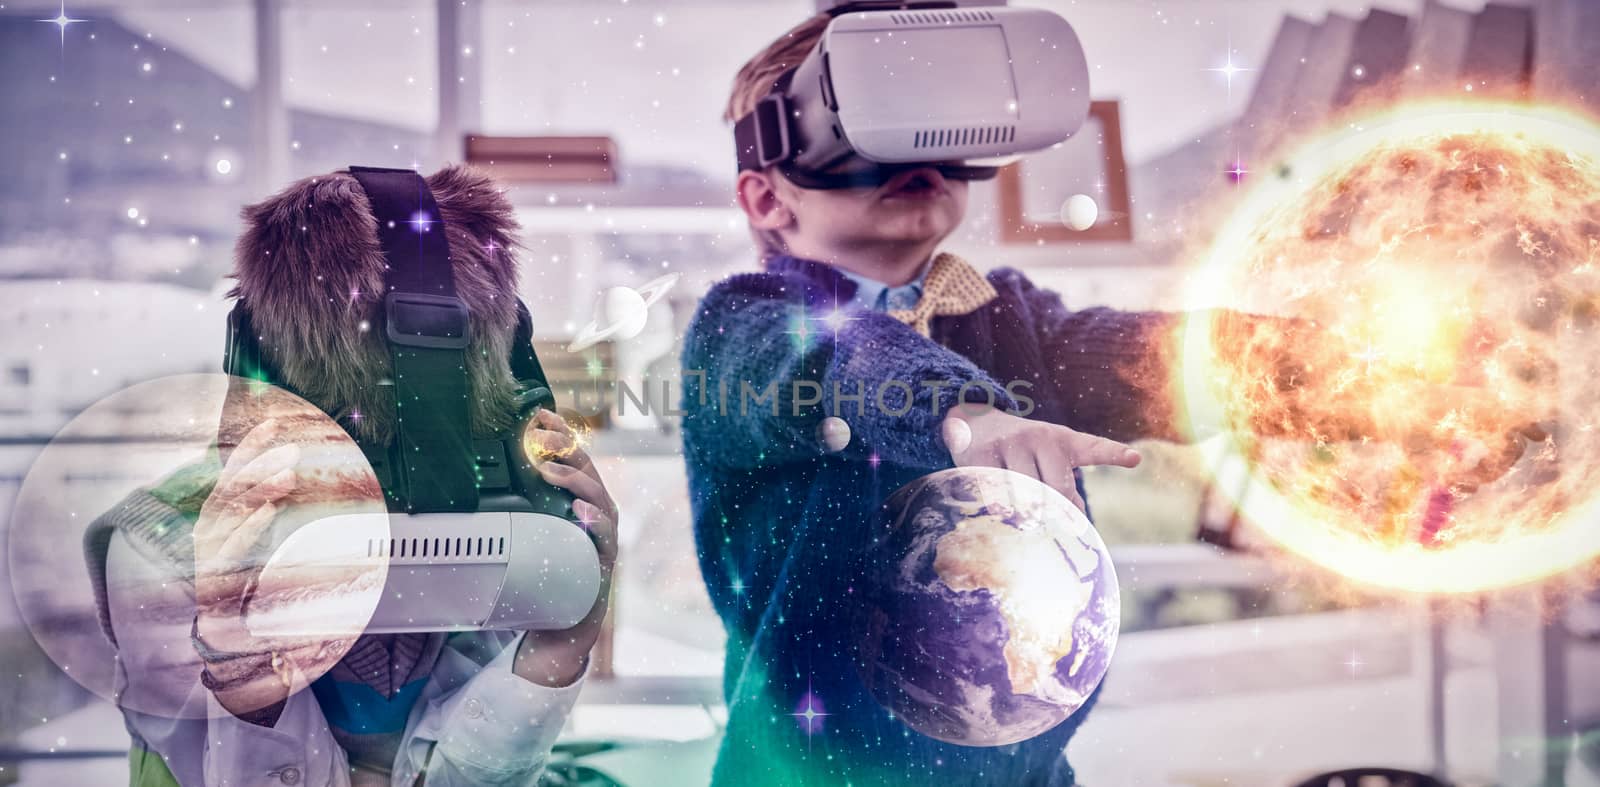 Composite image of solar system against white background against business people using virtual reality headsets